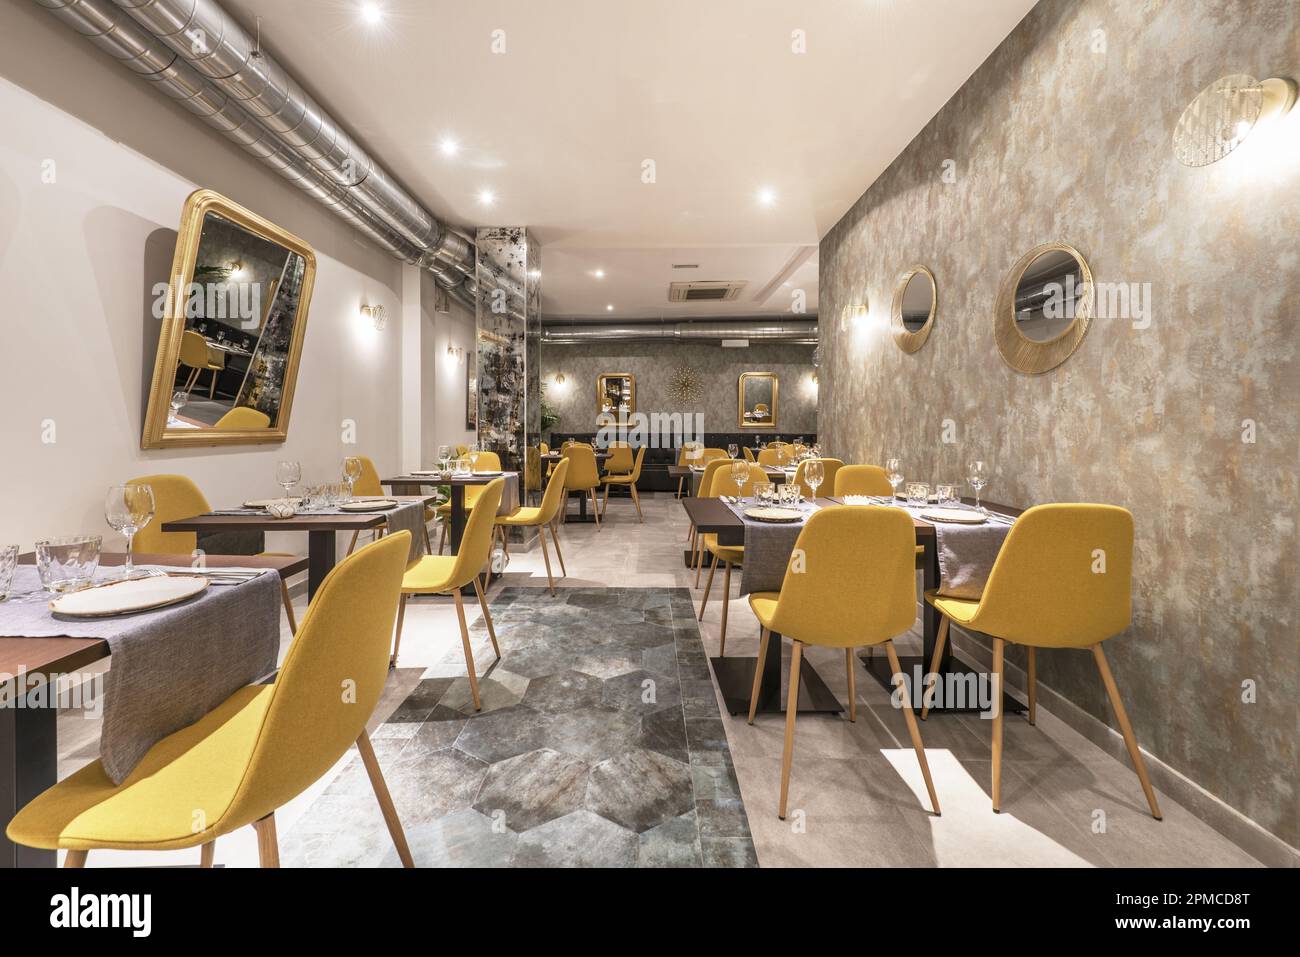 Dining room of a restaurant with assembled tables and chairs upholstered in yellow fabric Stock Photo